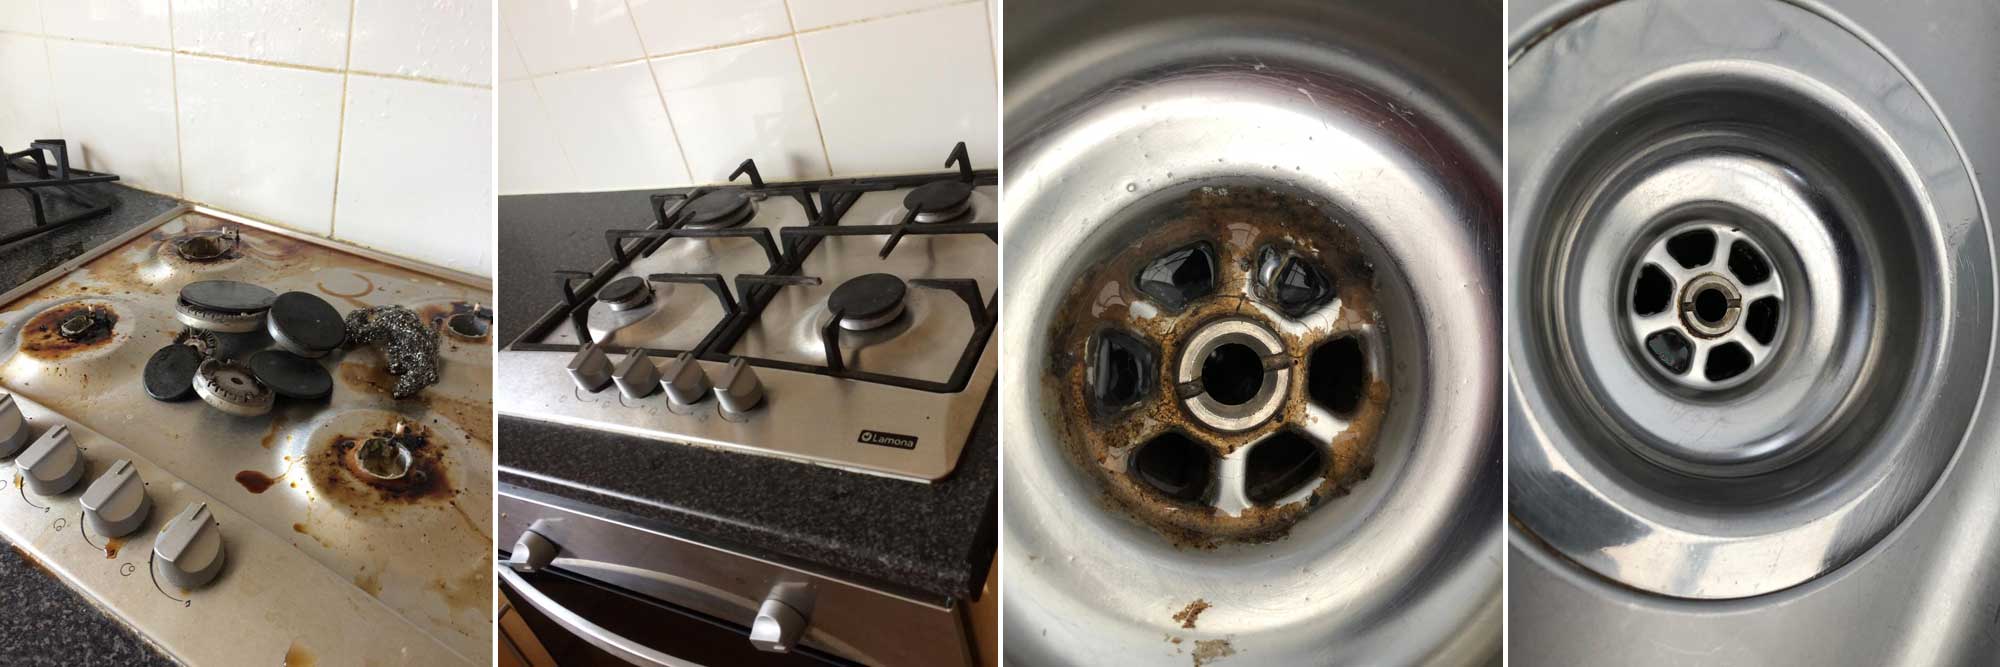 Before and After images by Oyster Cleaning Services